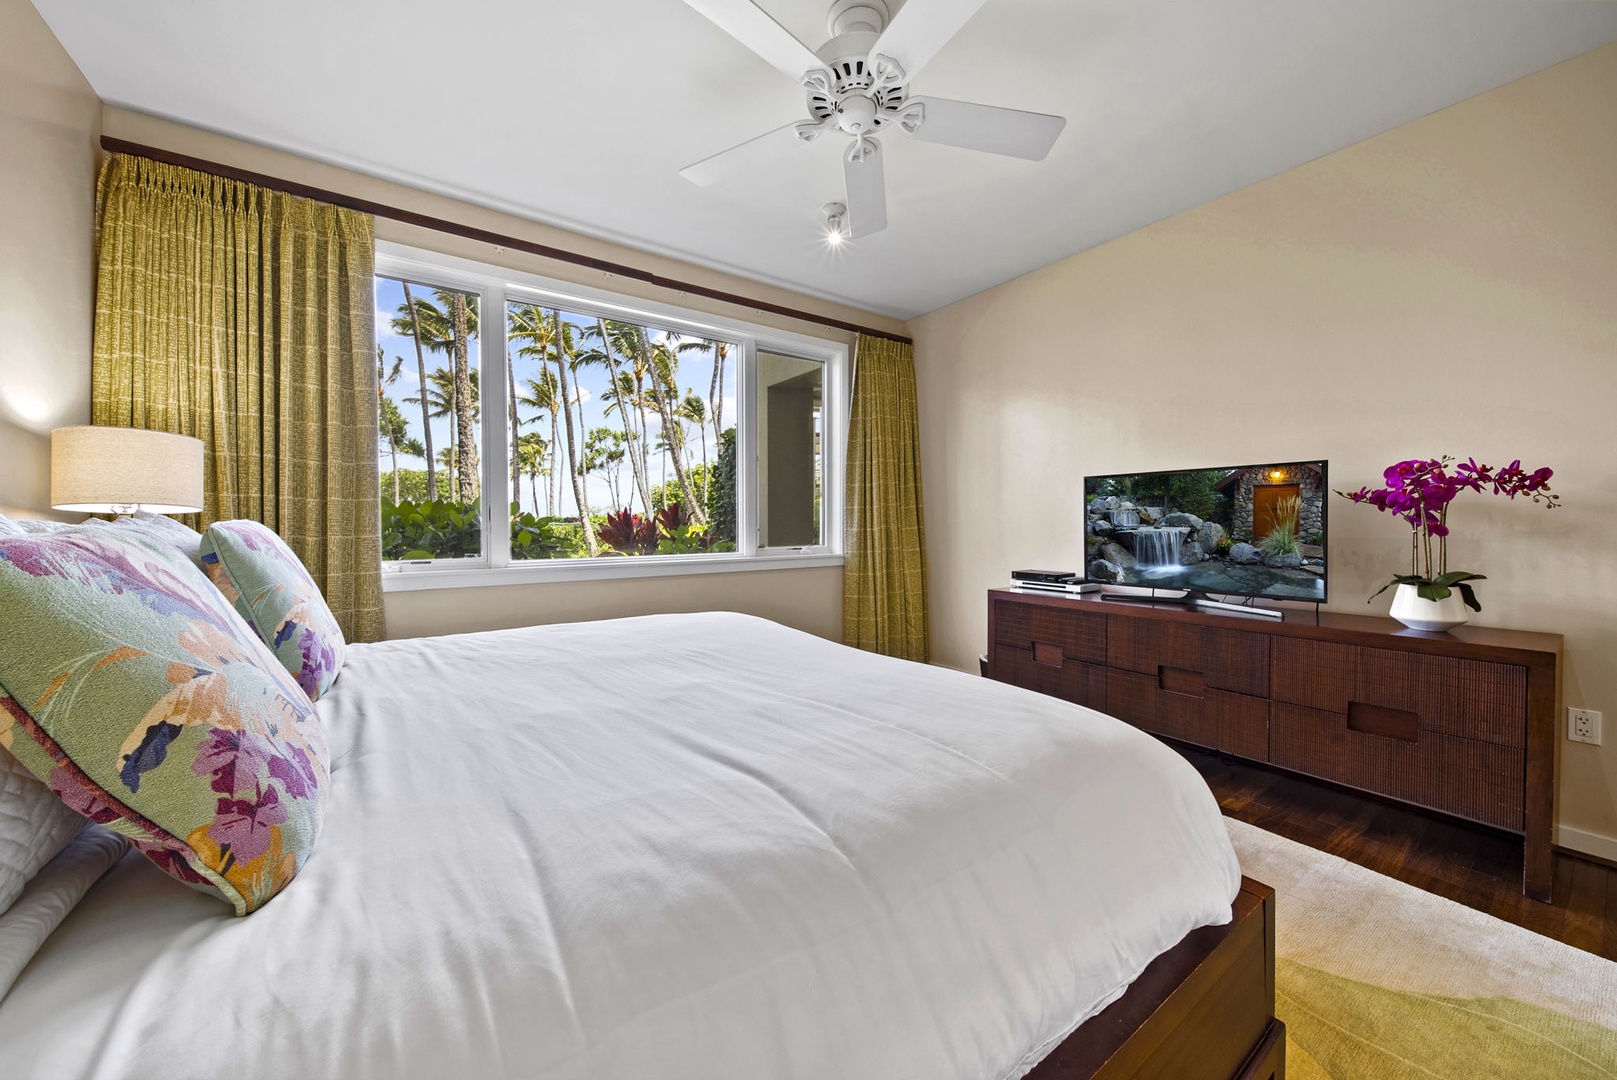 Kahuku Vacation Rentals, Turtle Bay Villas 112 - Main bedroom with a view of the garden